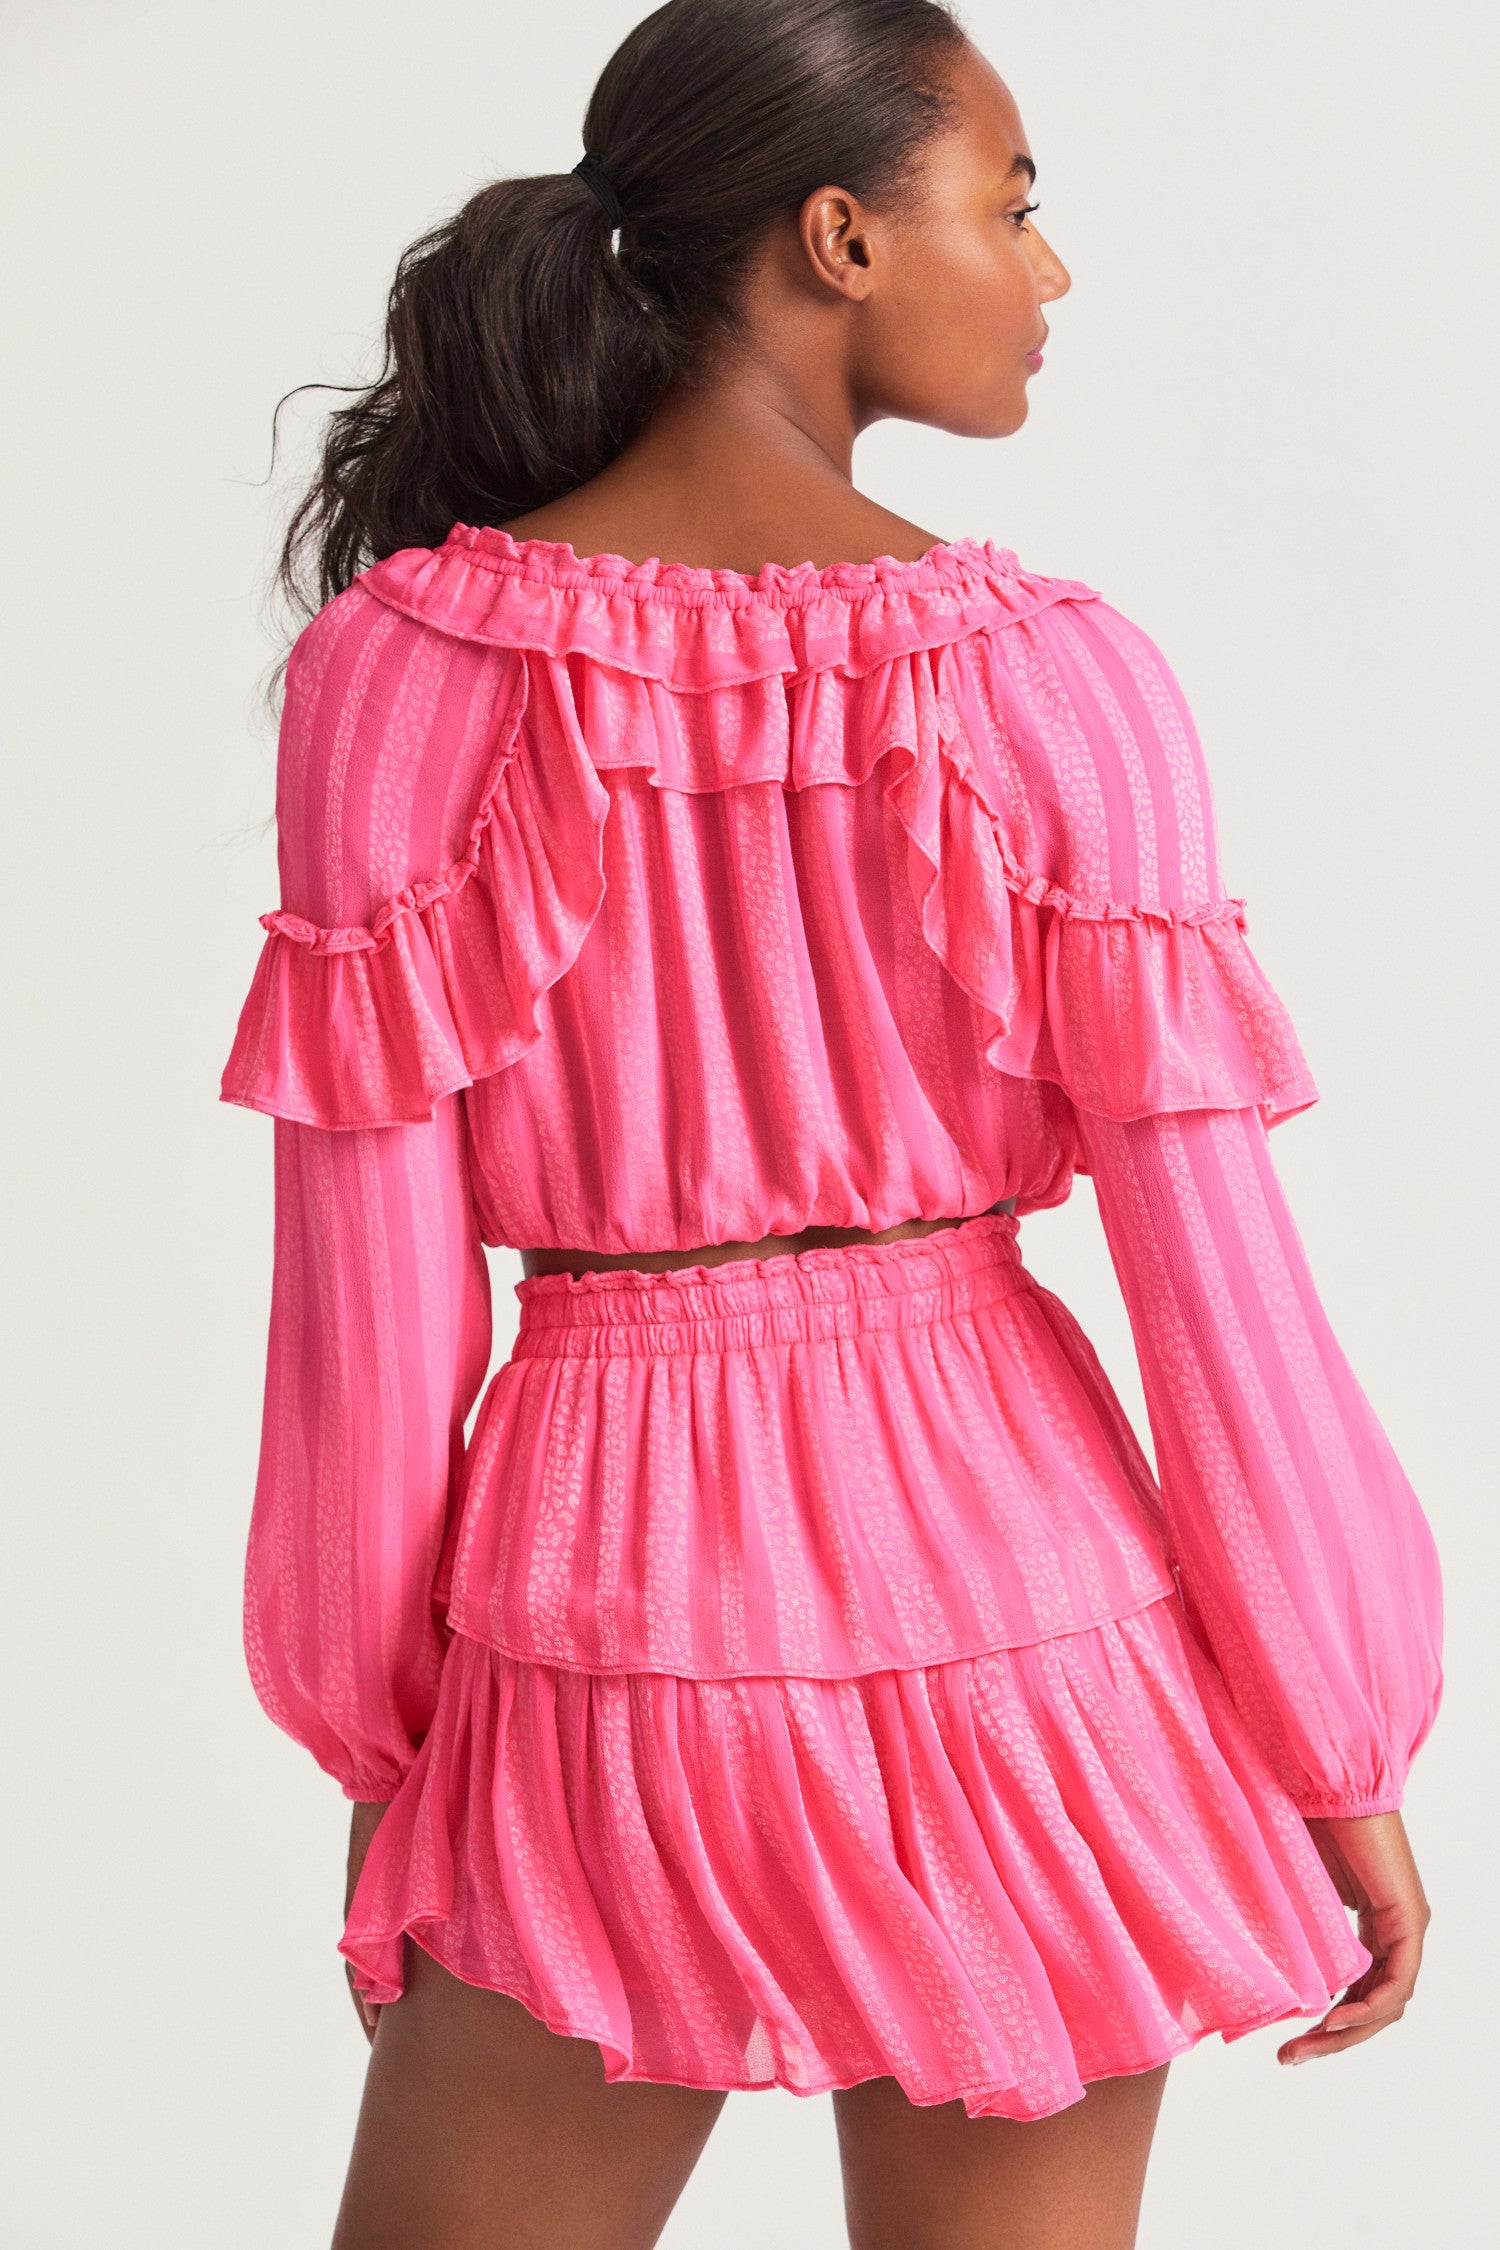 Pink long sleeved-top features a striped jacquard fabric, dramatic ruffles all over, an elasticated waist, elastic at the sleeve openings, and a fully functioning center front slit.